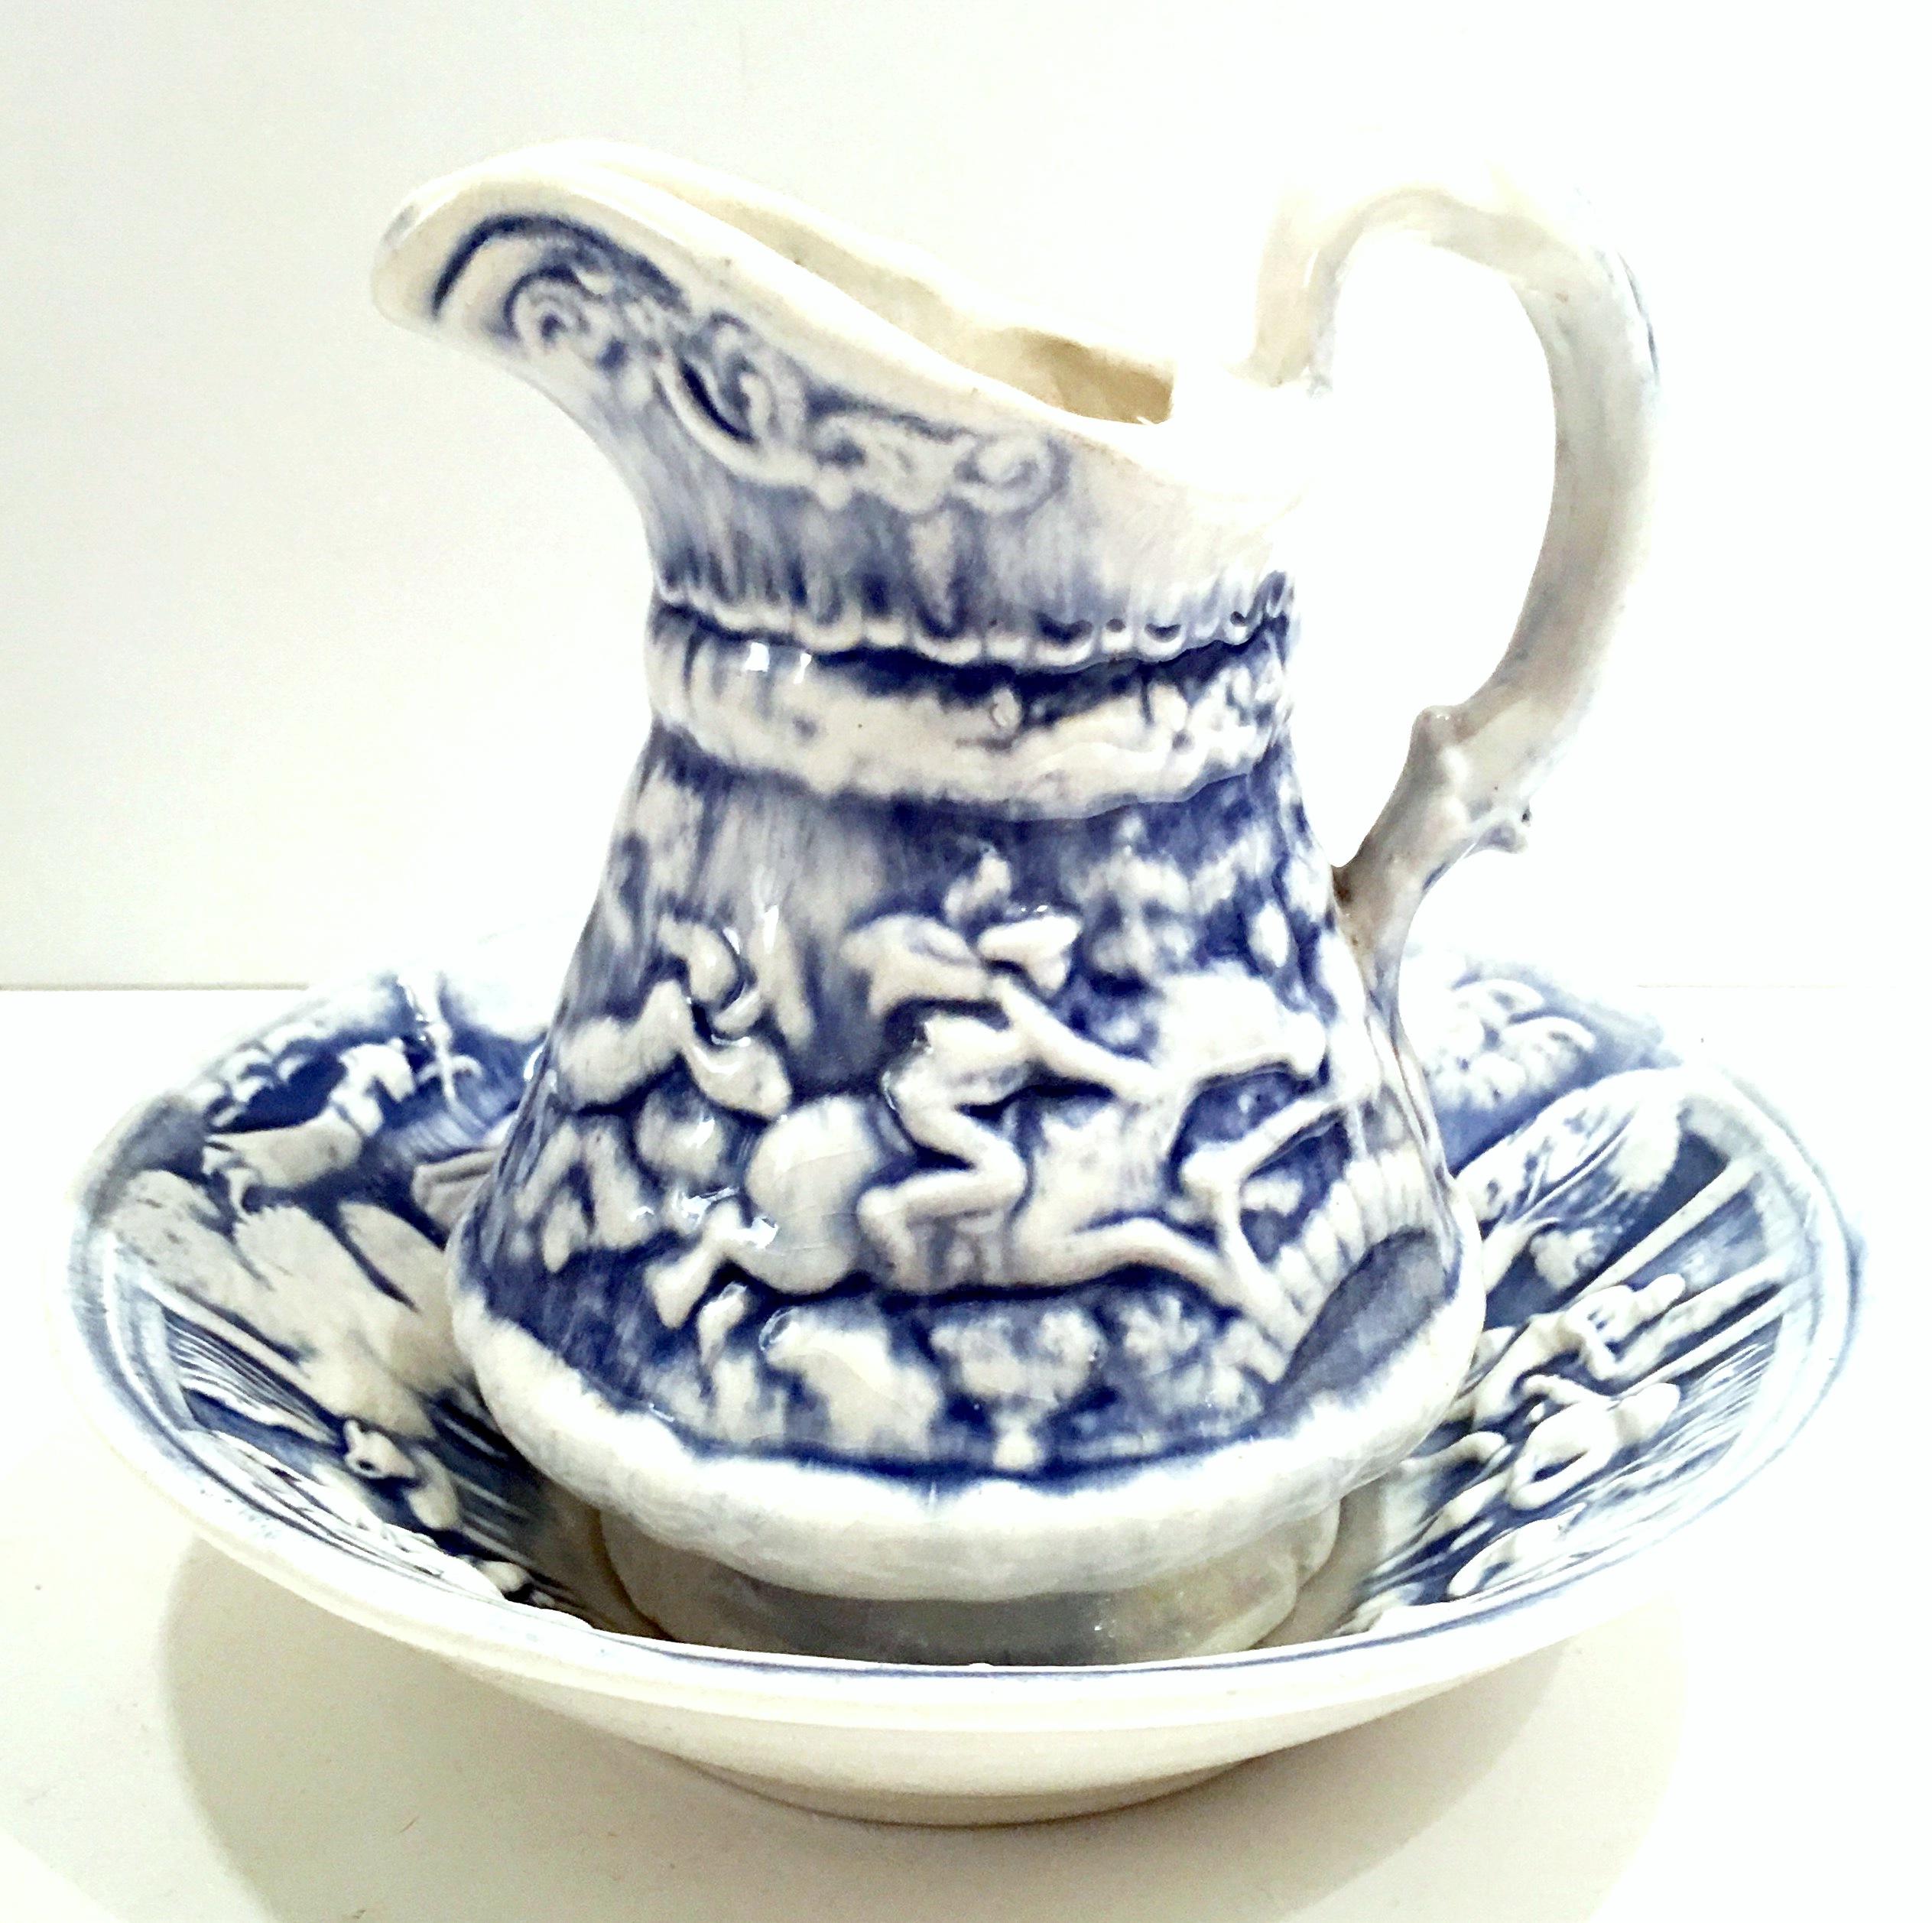 Vintage ceramic blue and white repose pitcher and basin, two-piece set. The repose pattern of tavern and witches scene is based on a poem by Robert Burns, 1790, entitled 